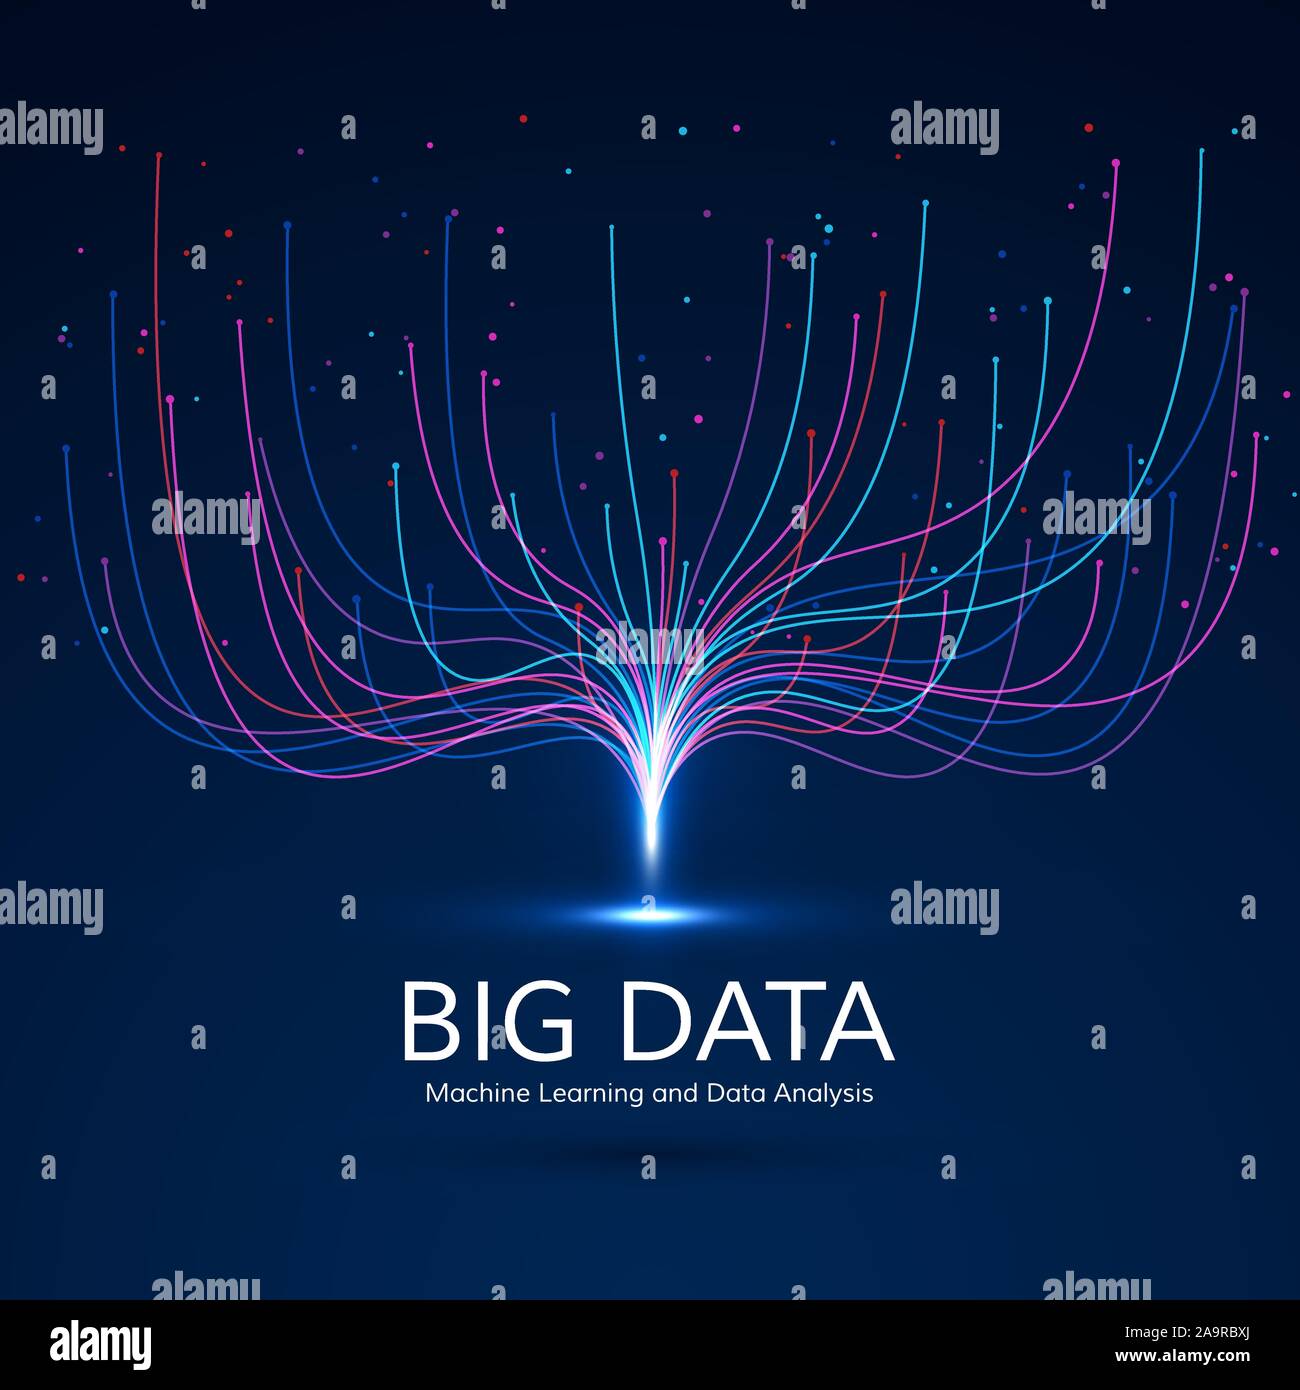 Abstract Big Data Visual Concept. Digital Technology Visualization. Machine Learning and Data Analysis. Dot and Connection Lines Data Flow and Process Stock Vector